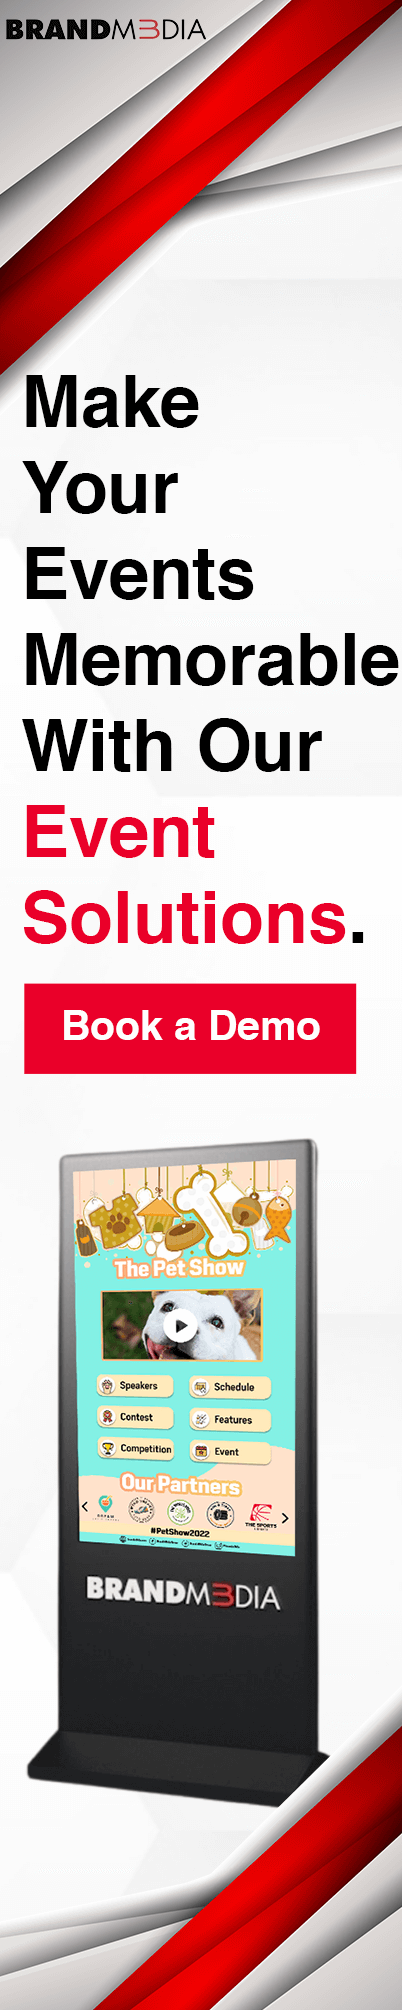 Brandm3dia- make your events memorable with our event solutions